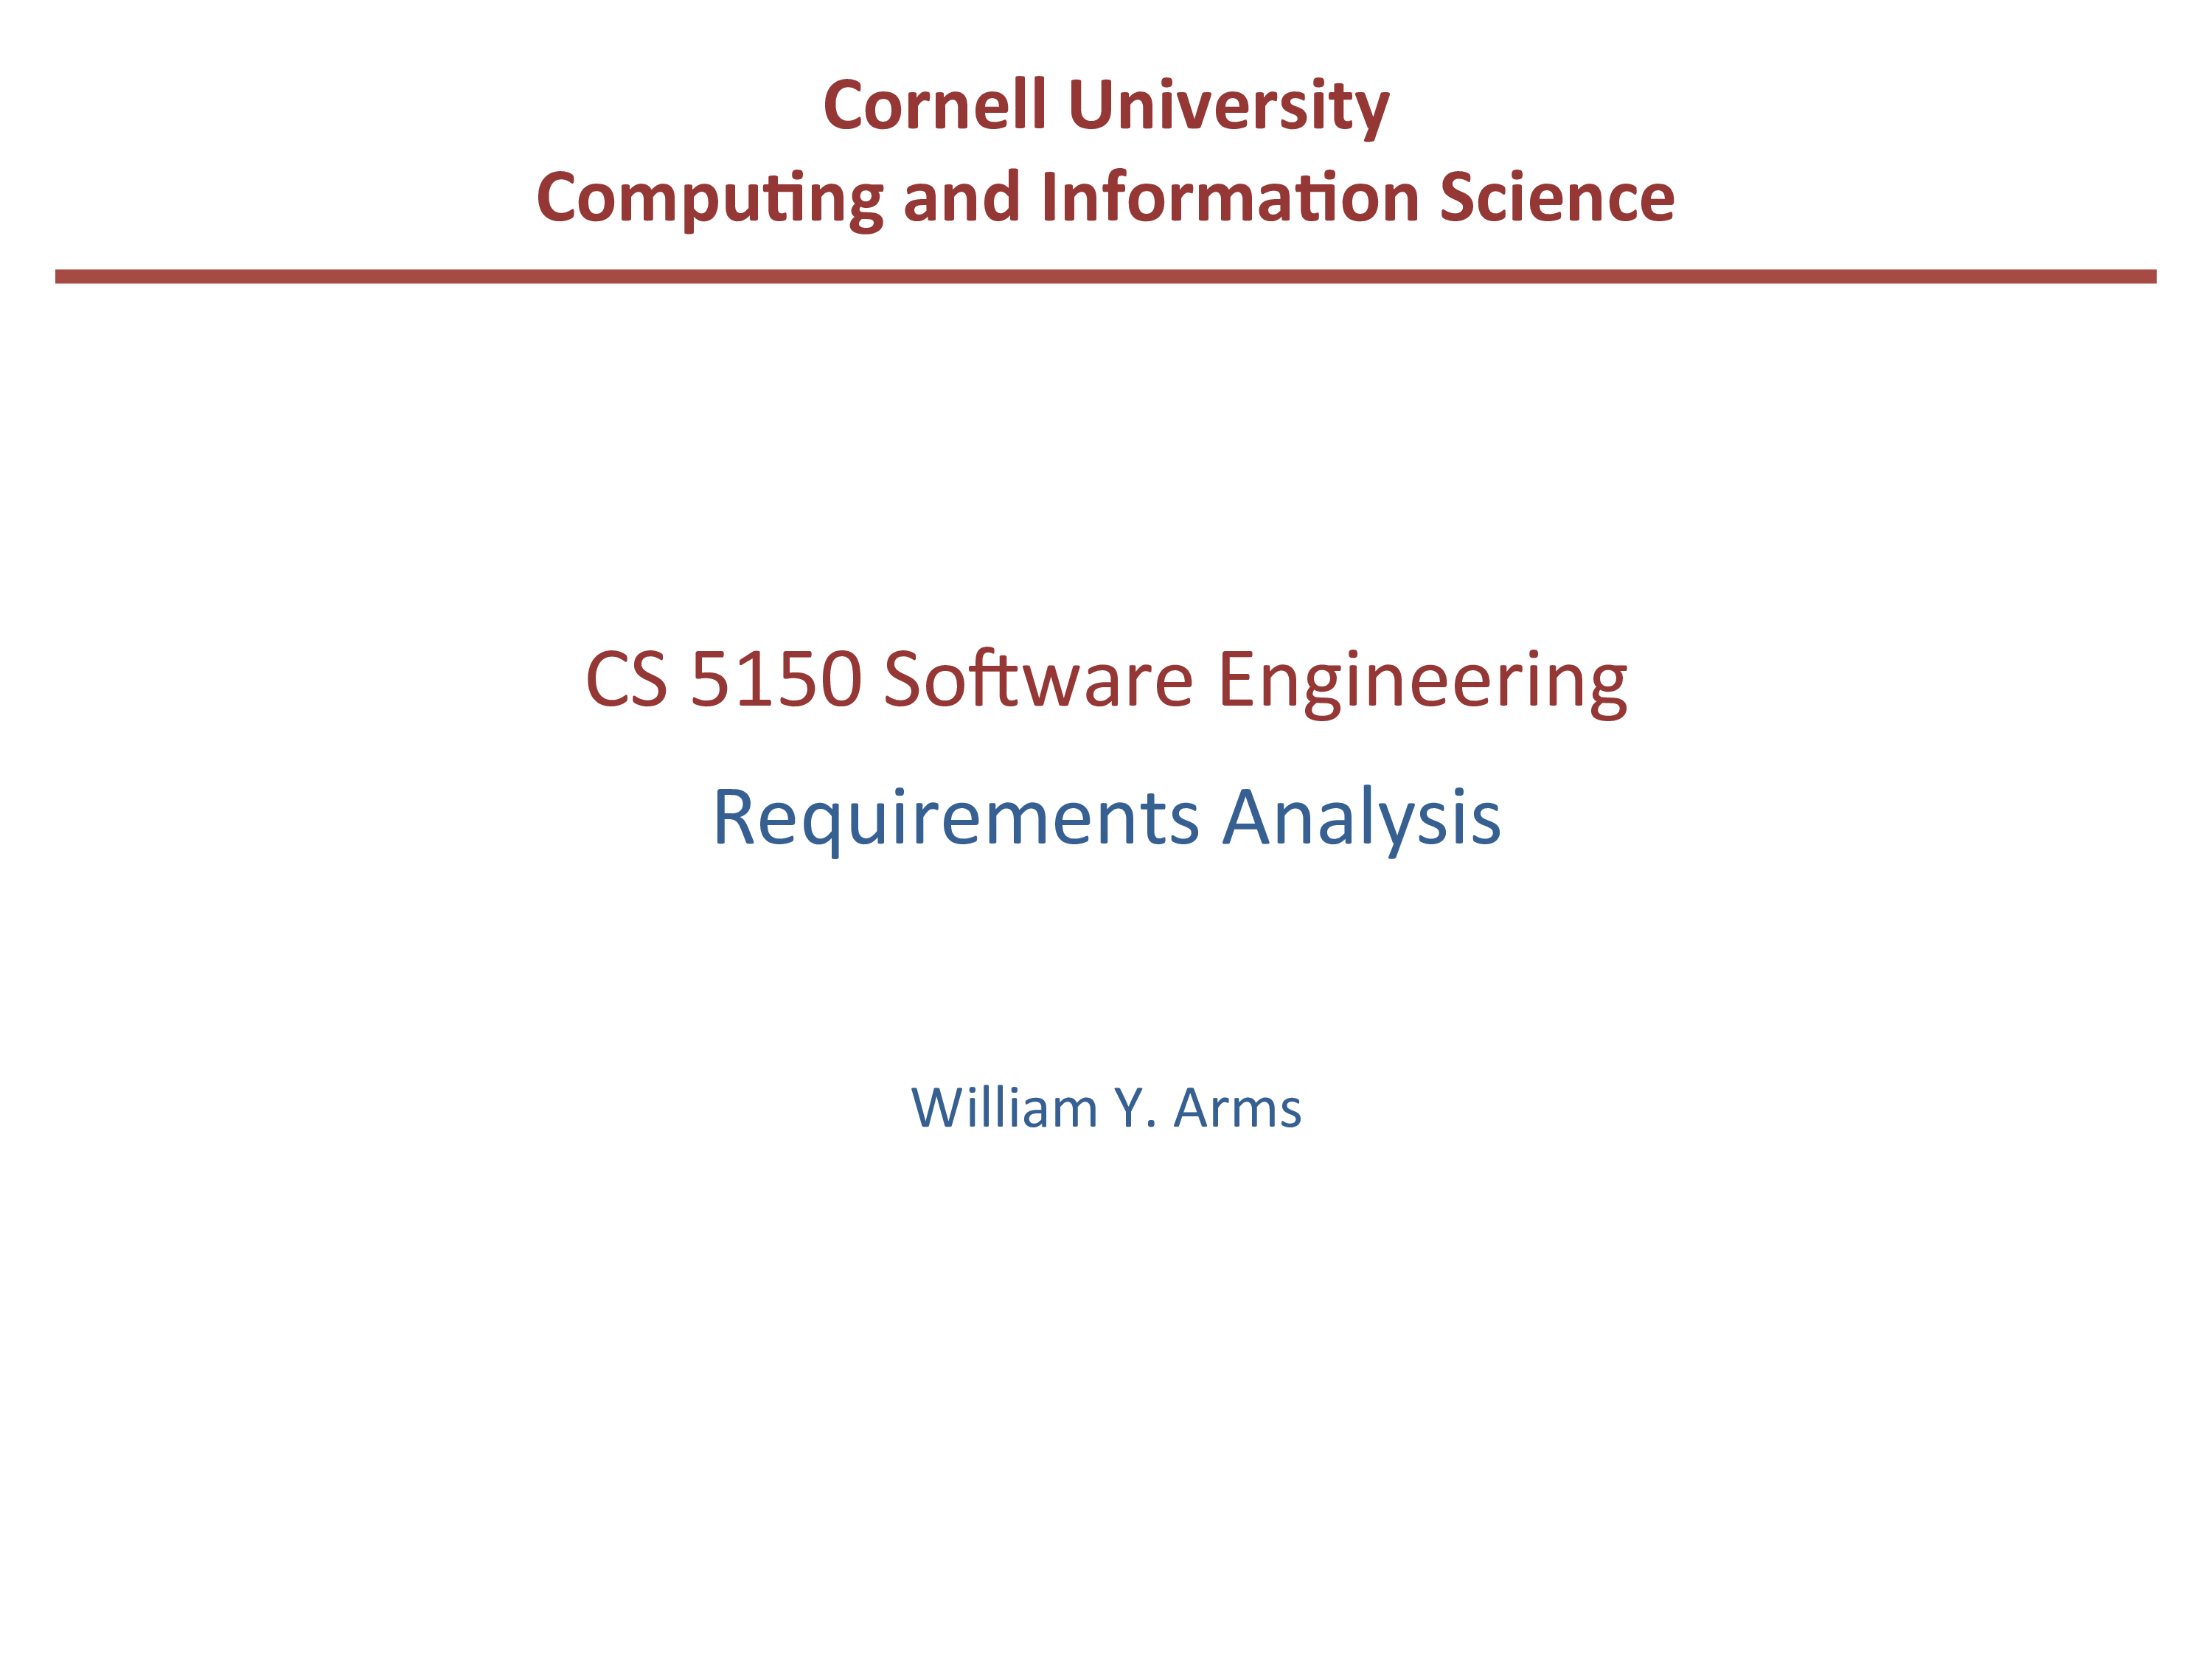 software engineering requirements analysis template